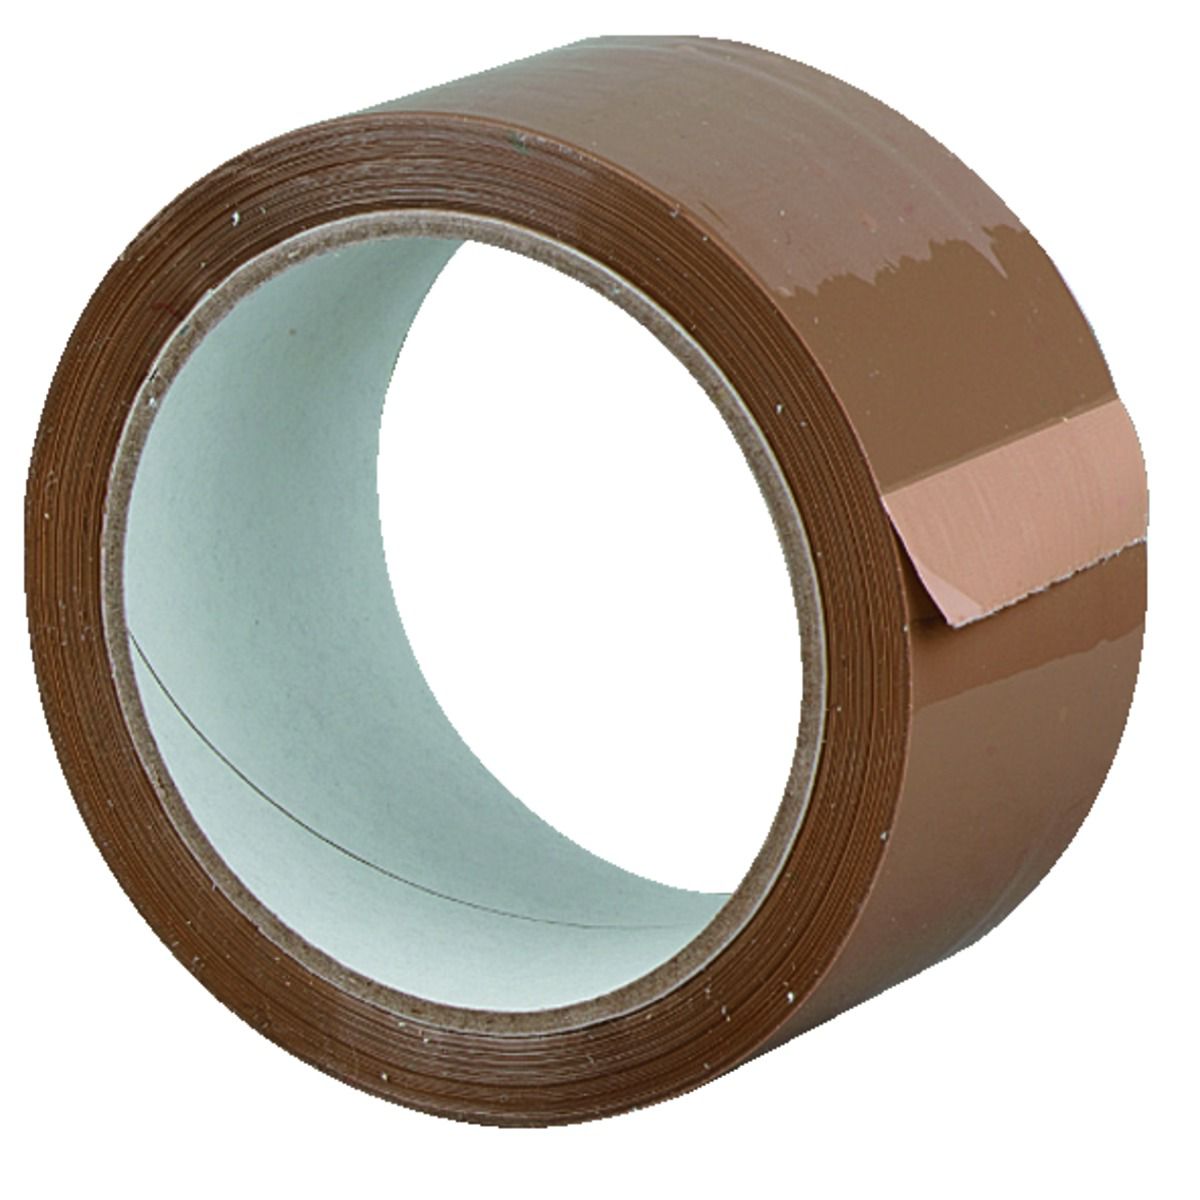 Image of Wickes All Purpose Packaging Tape - Brown 48mm x 50m